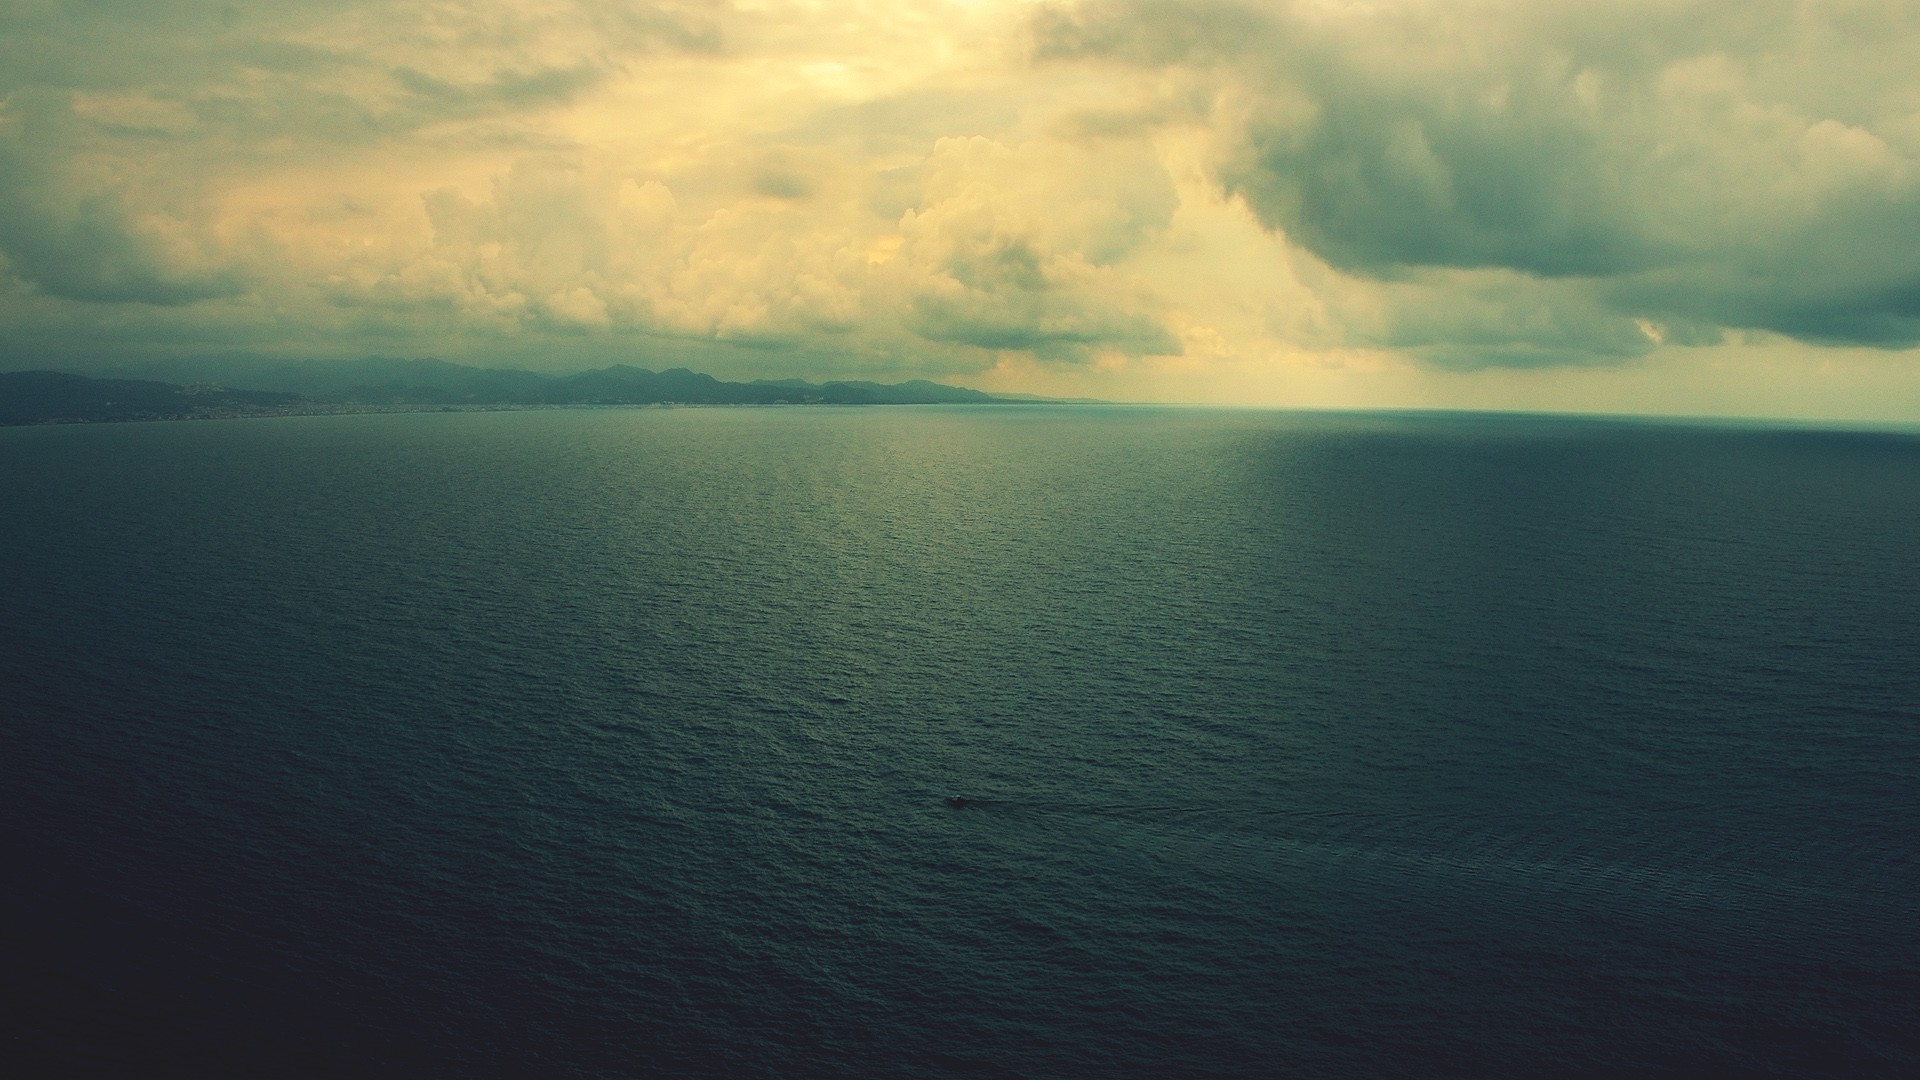 General 1920x1080 clouds sea sky nature aerial view landscape coast overcast lake horizon water loneliness